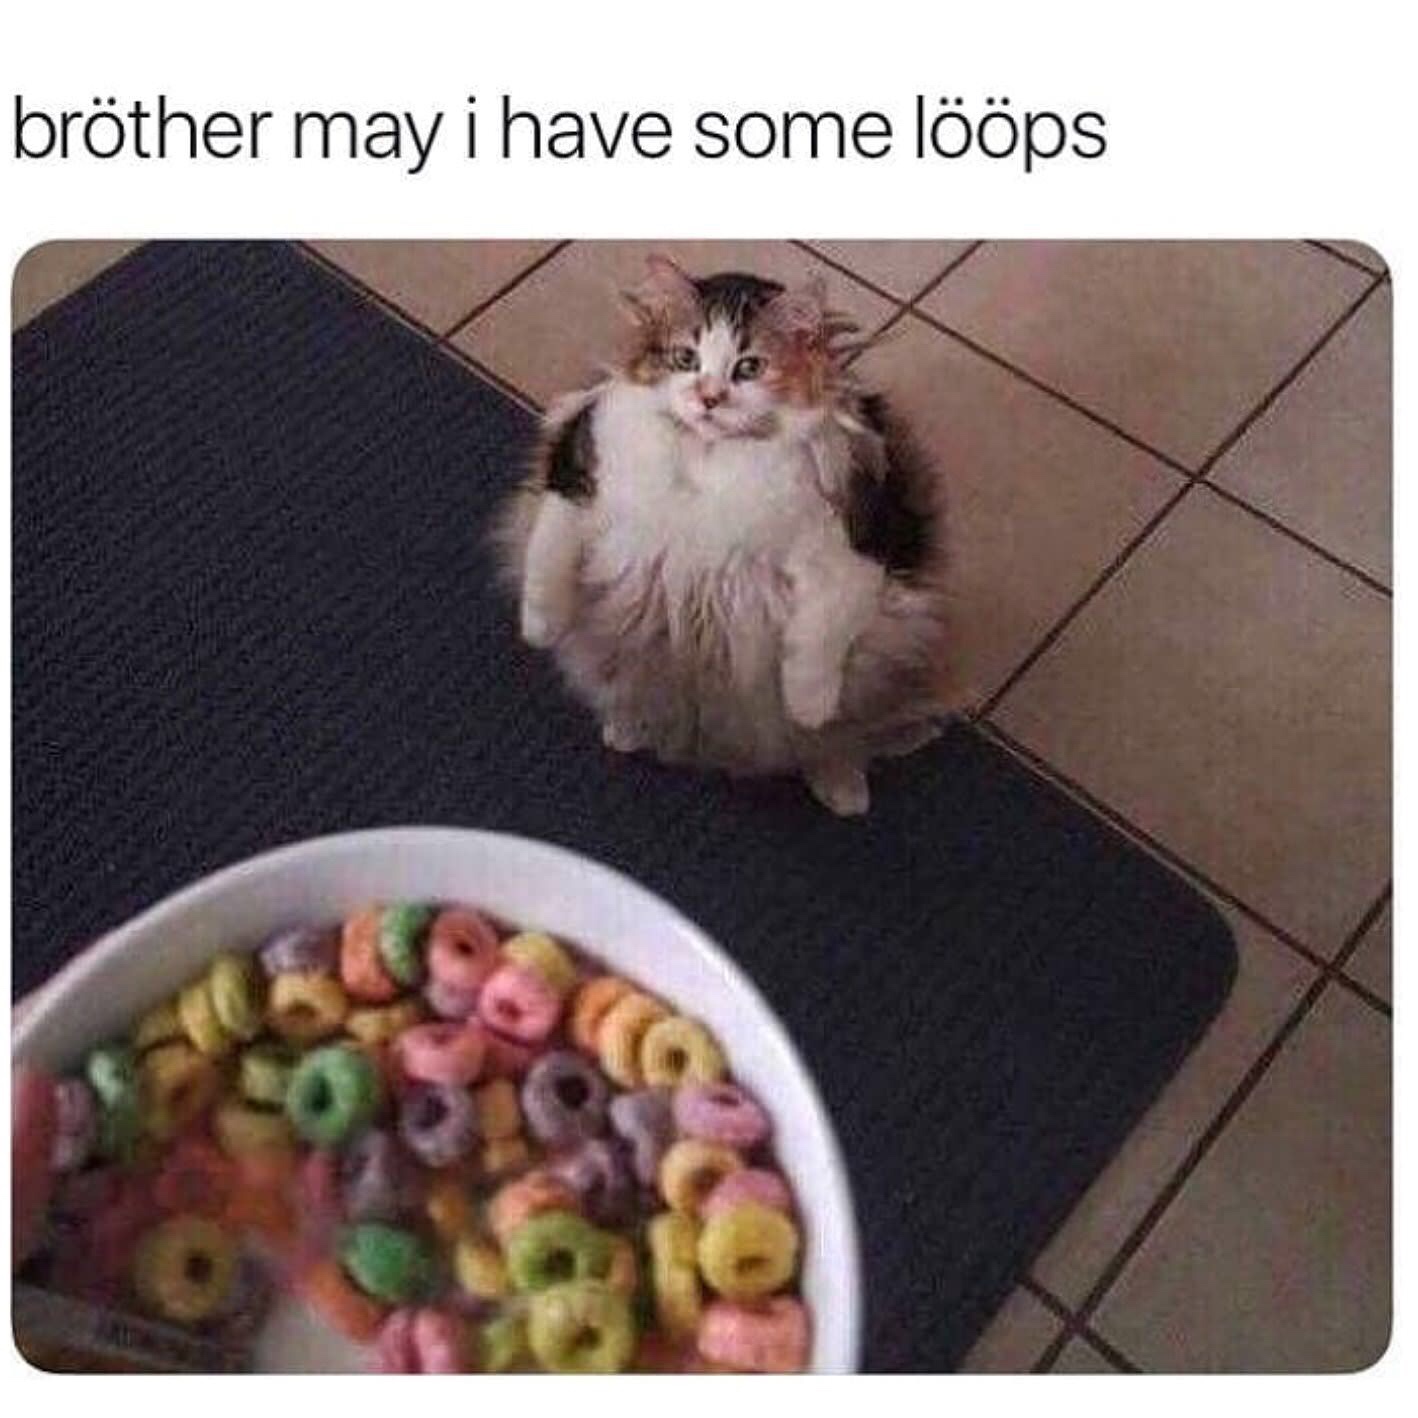 loops cat - bröther may i have some lööps - brther may i have some lps